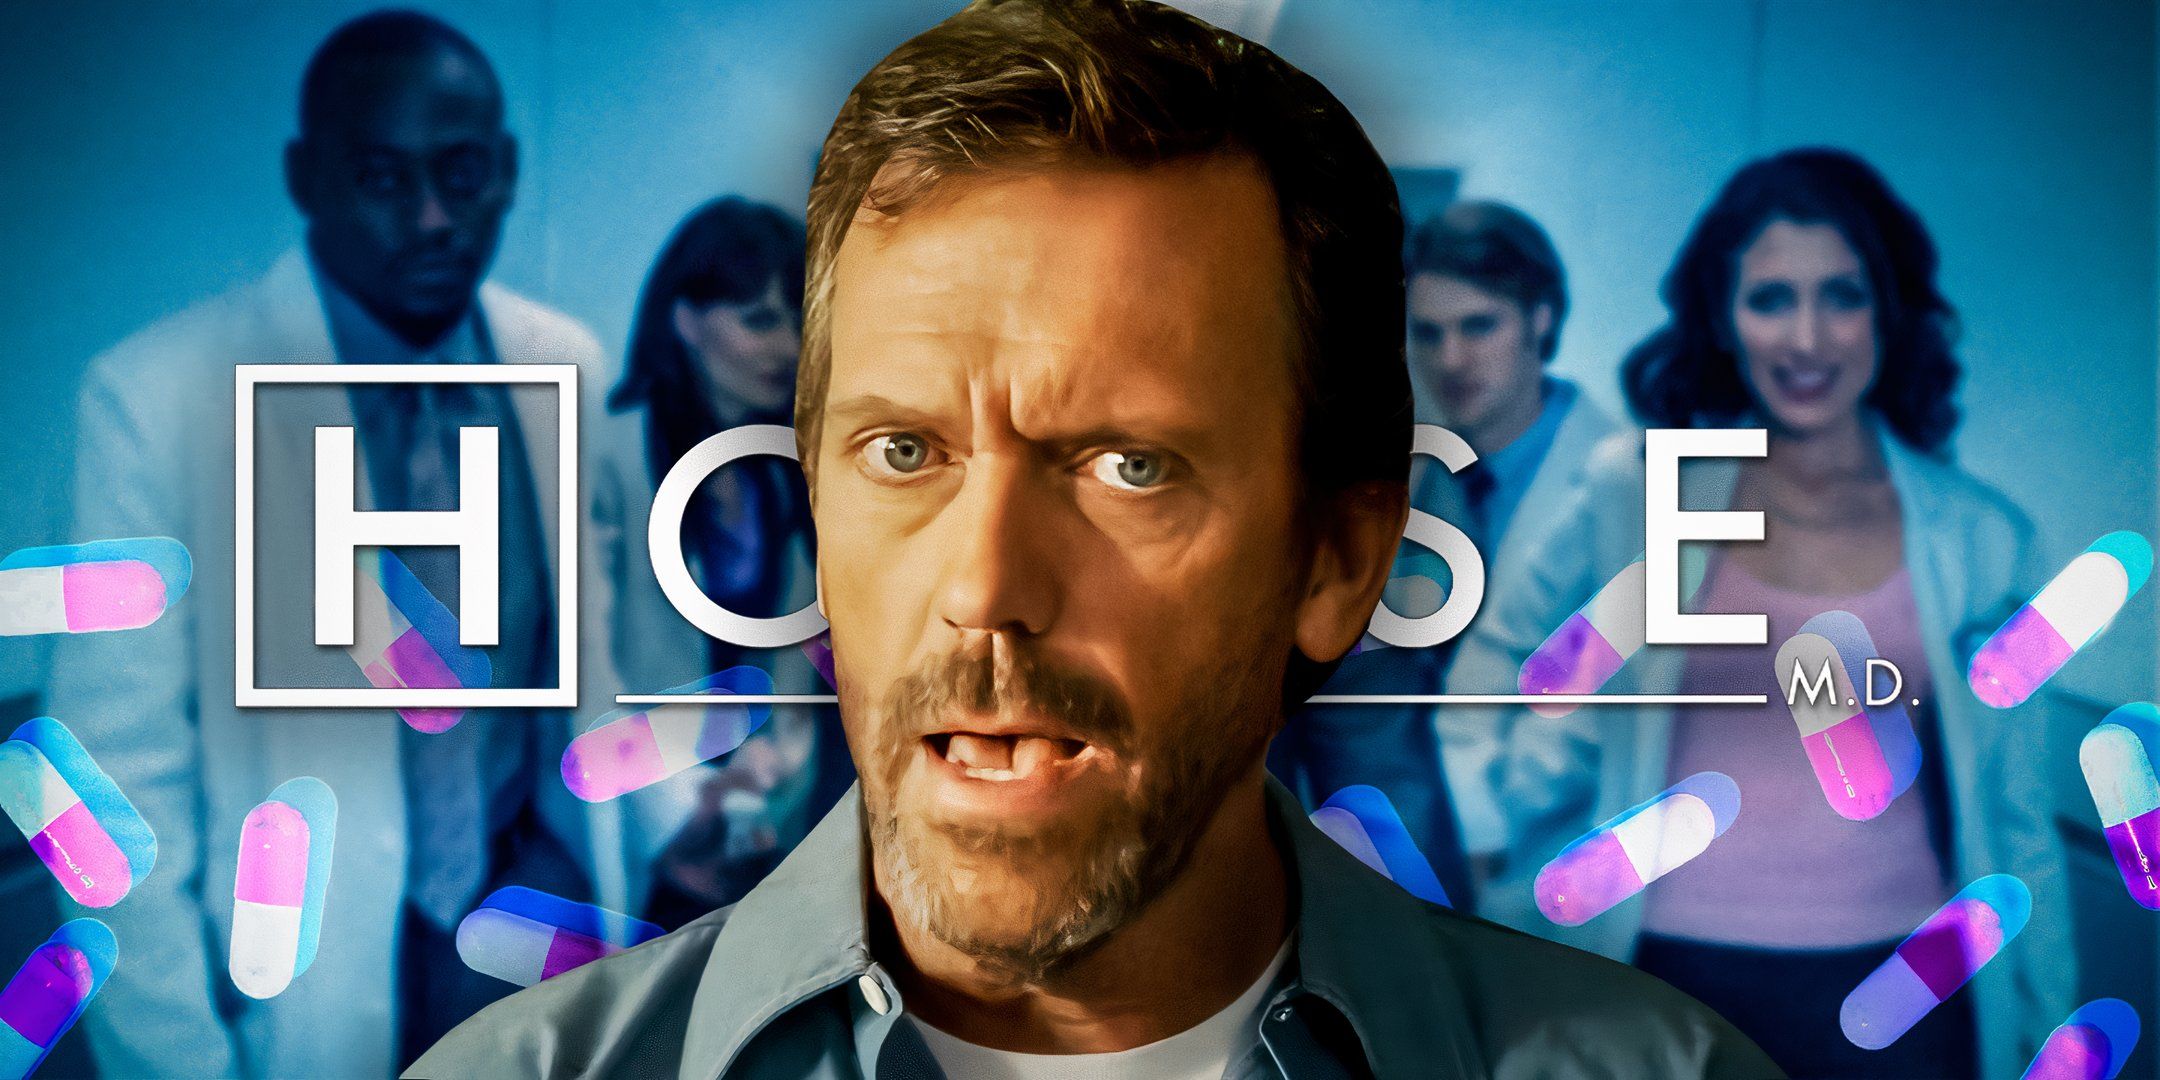 Hugh Laurie as Dr. Gregory House from House M.D.